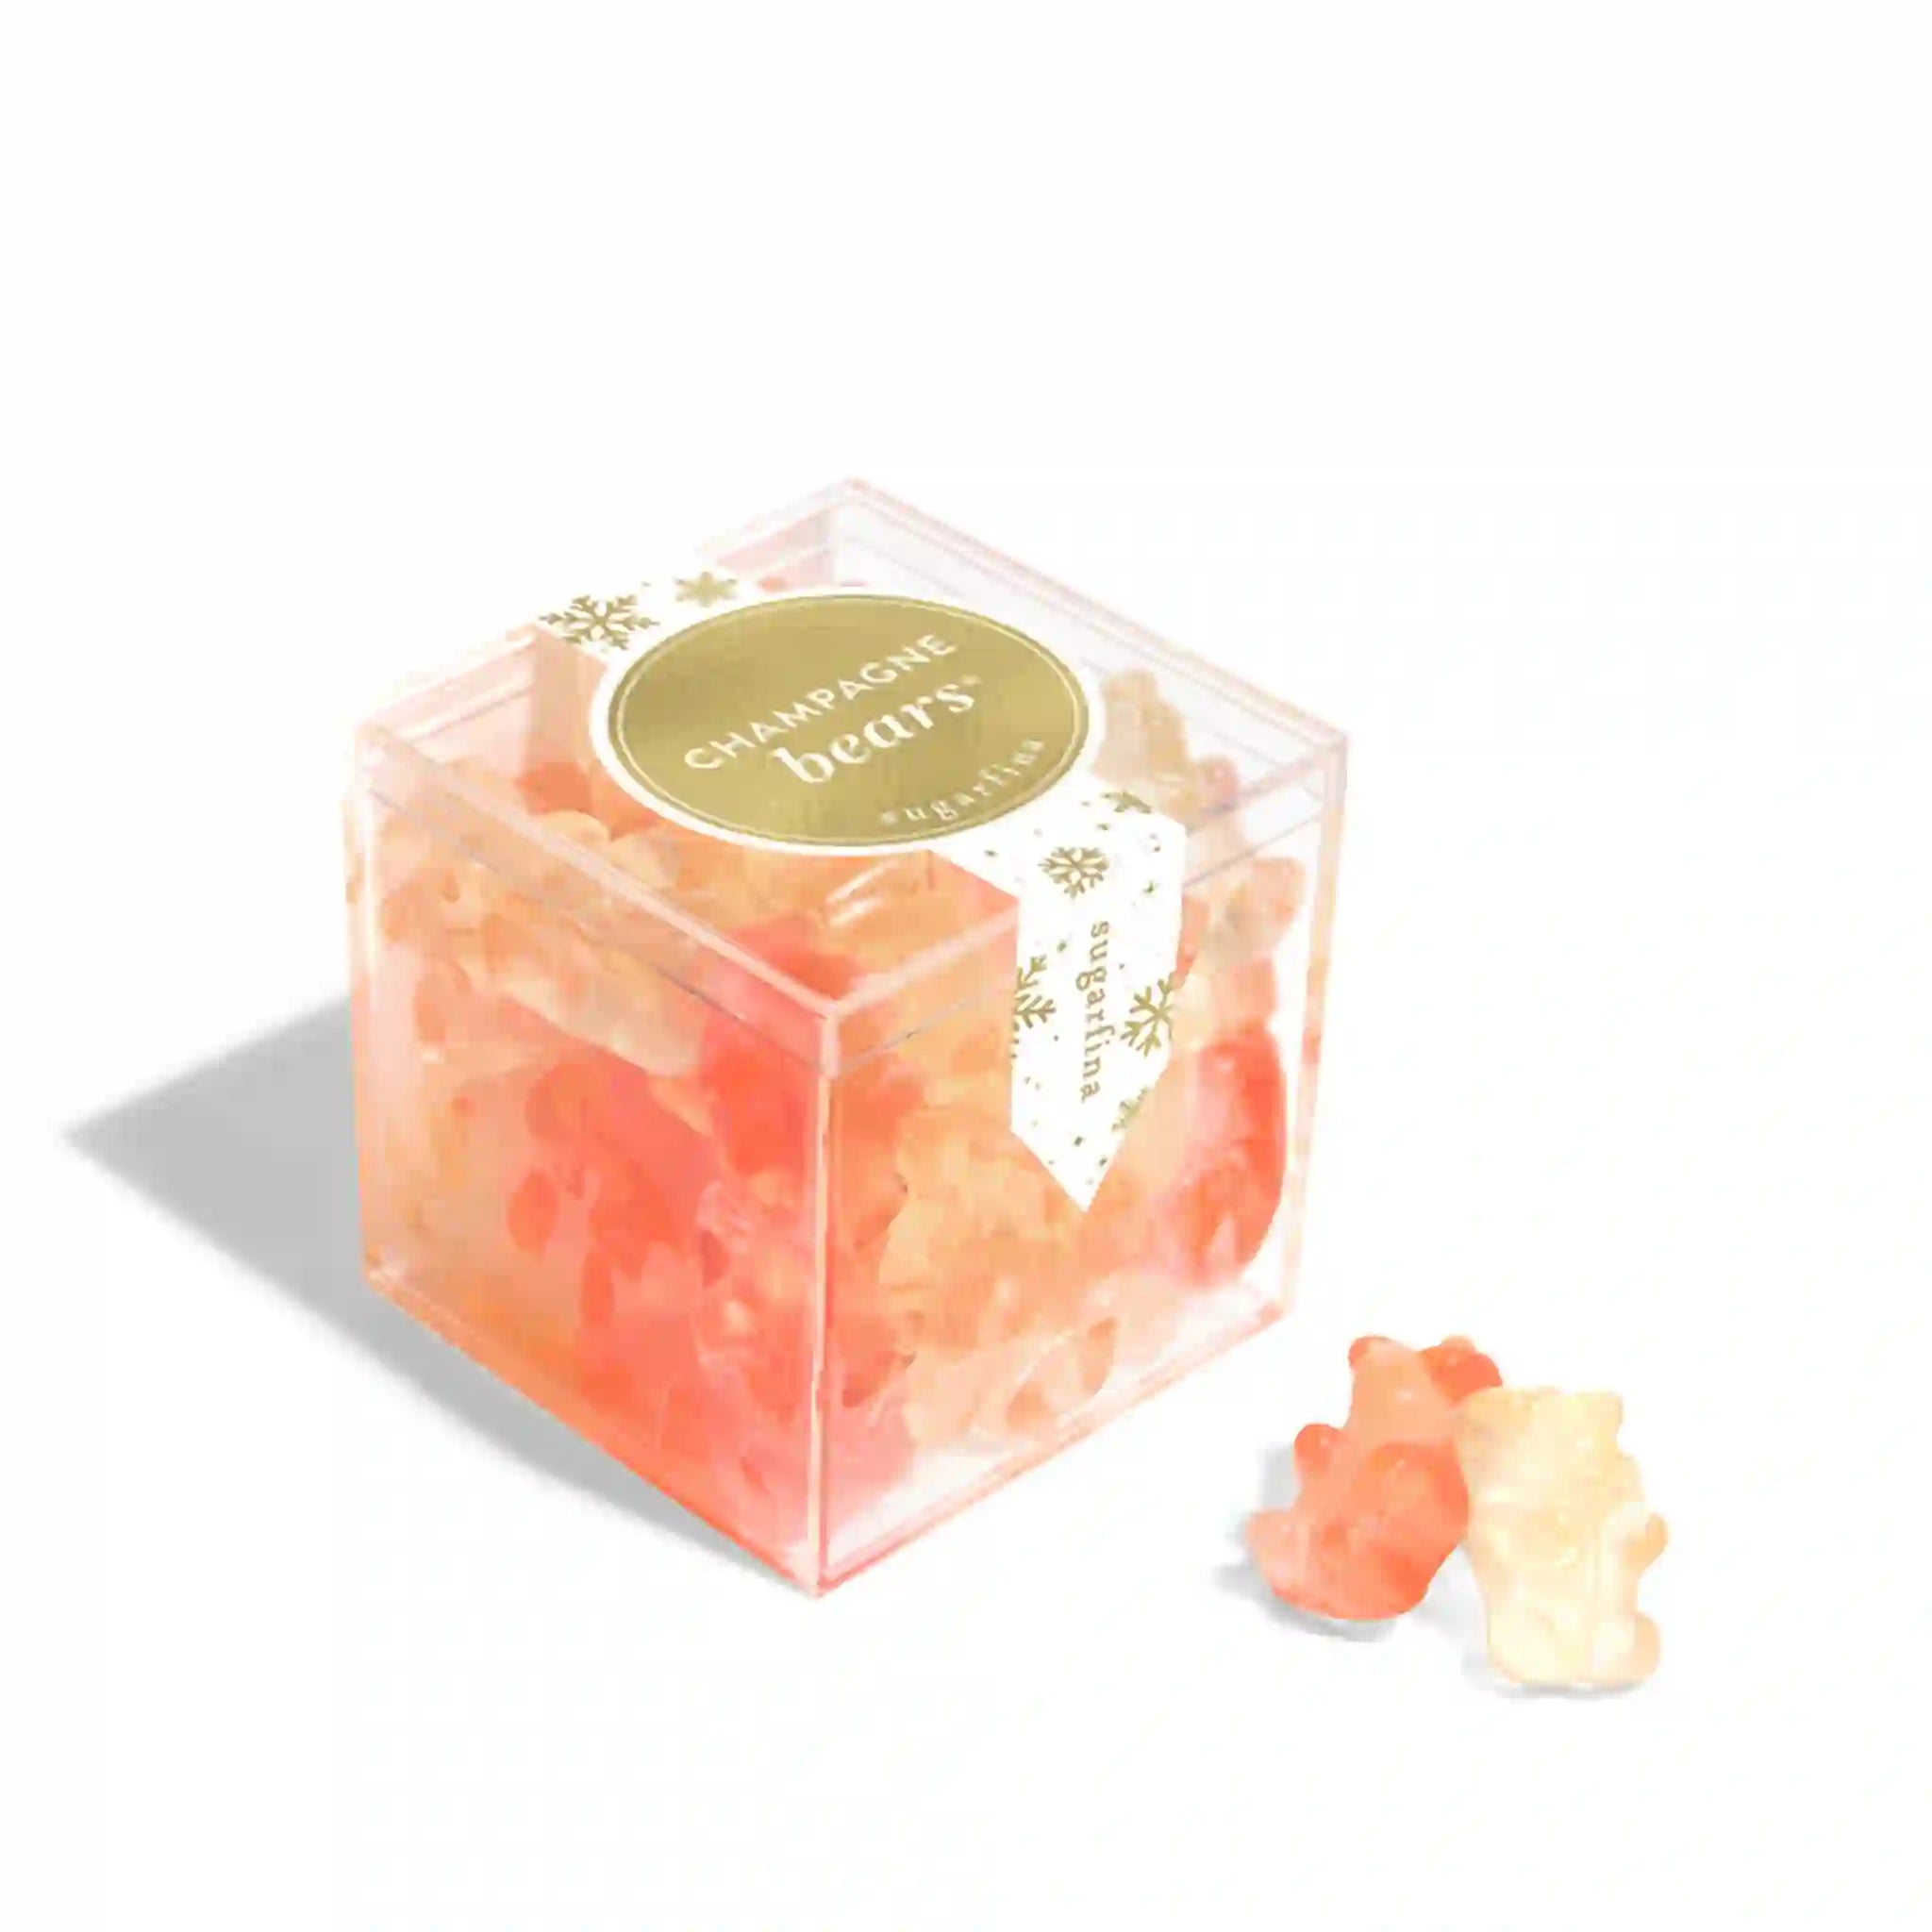 On a white background is a clear acrylic box filed with pink champagne bear gummies with a gold and white label on the front that reads, 'Champagne Bears".